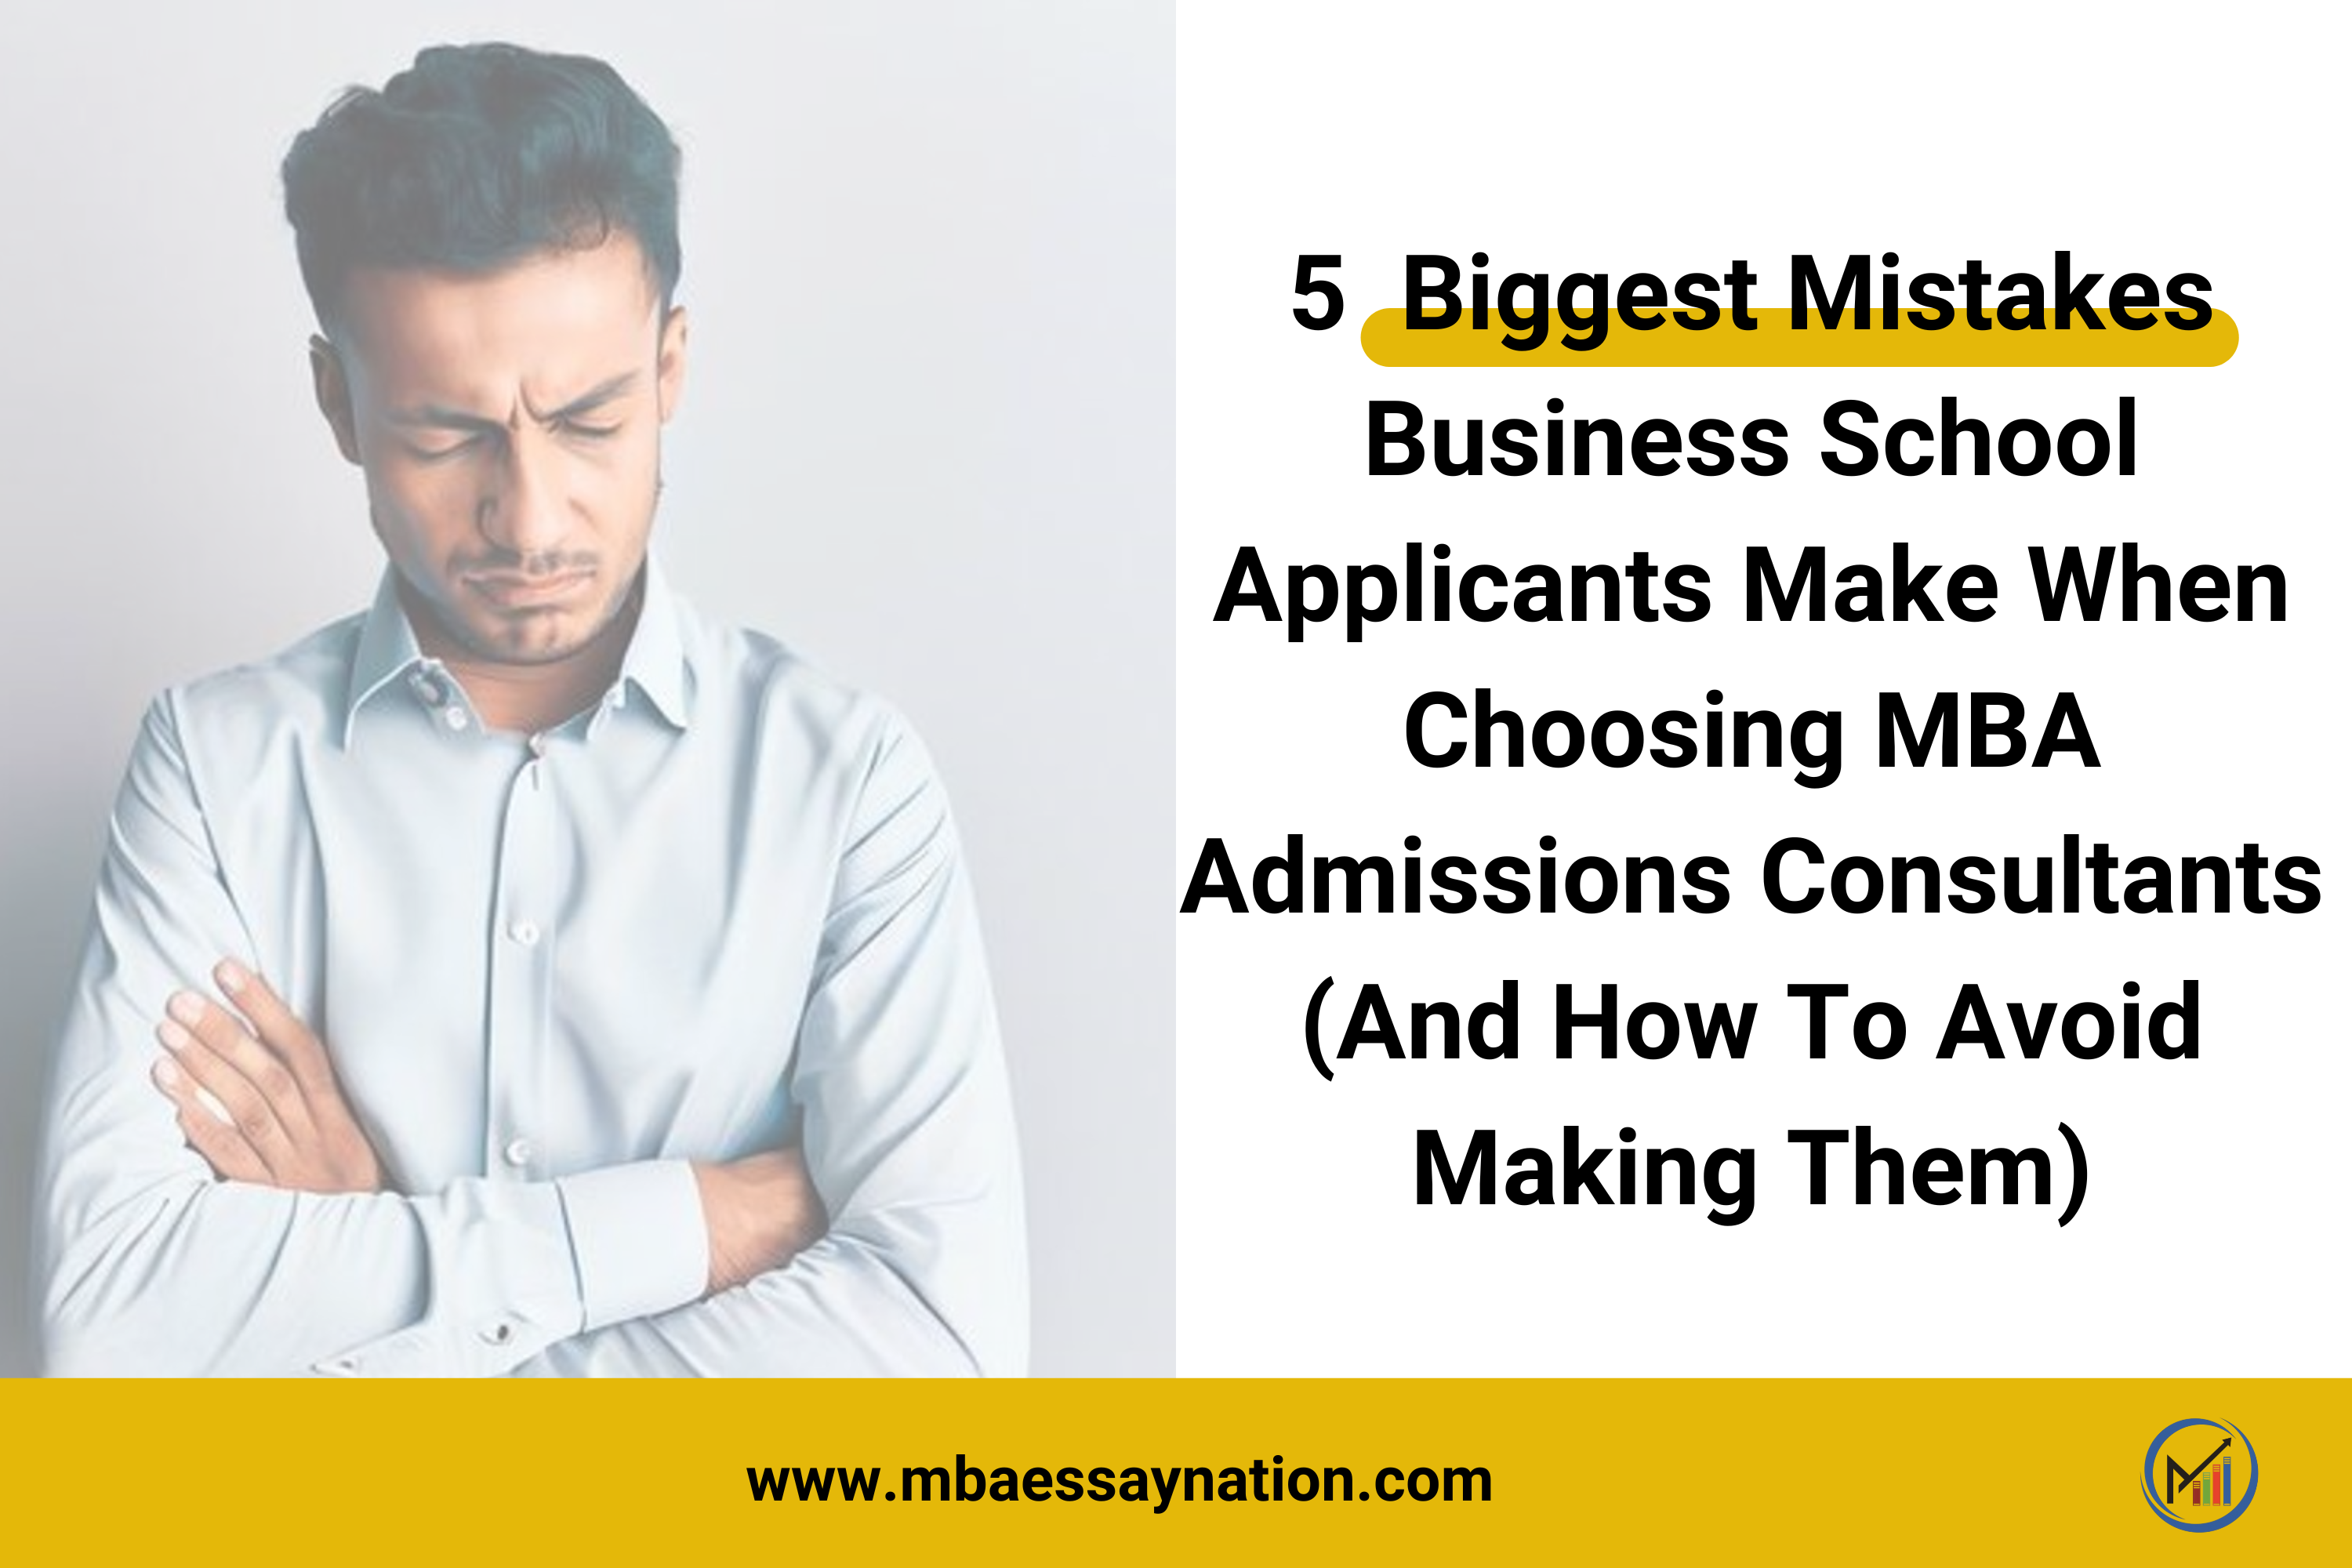 5 Biggest Mistakes Business School Applicants Make When Choosing MBA Admissions Consultant (And How To Avoid Making Them)